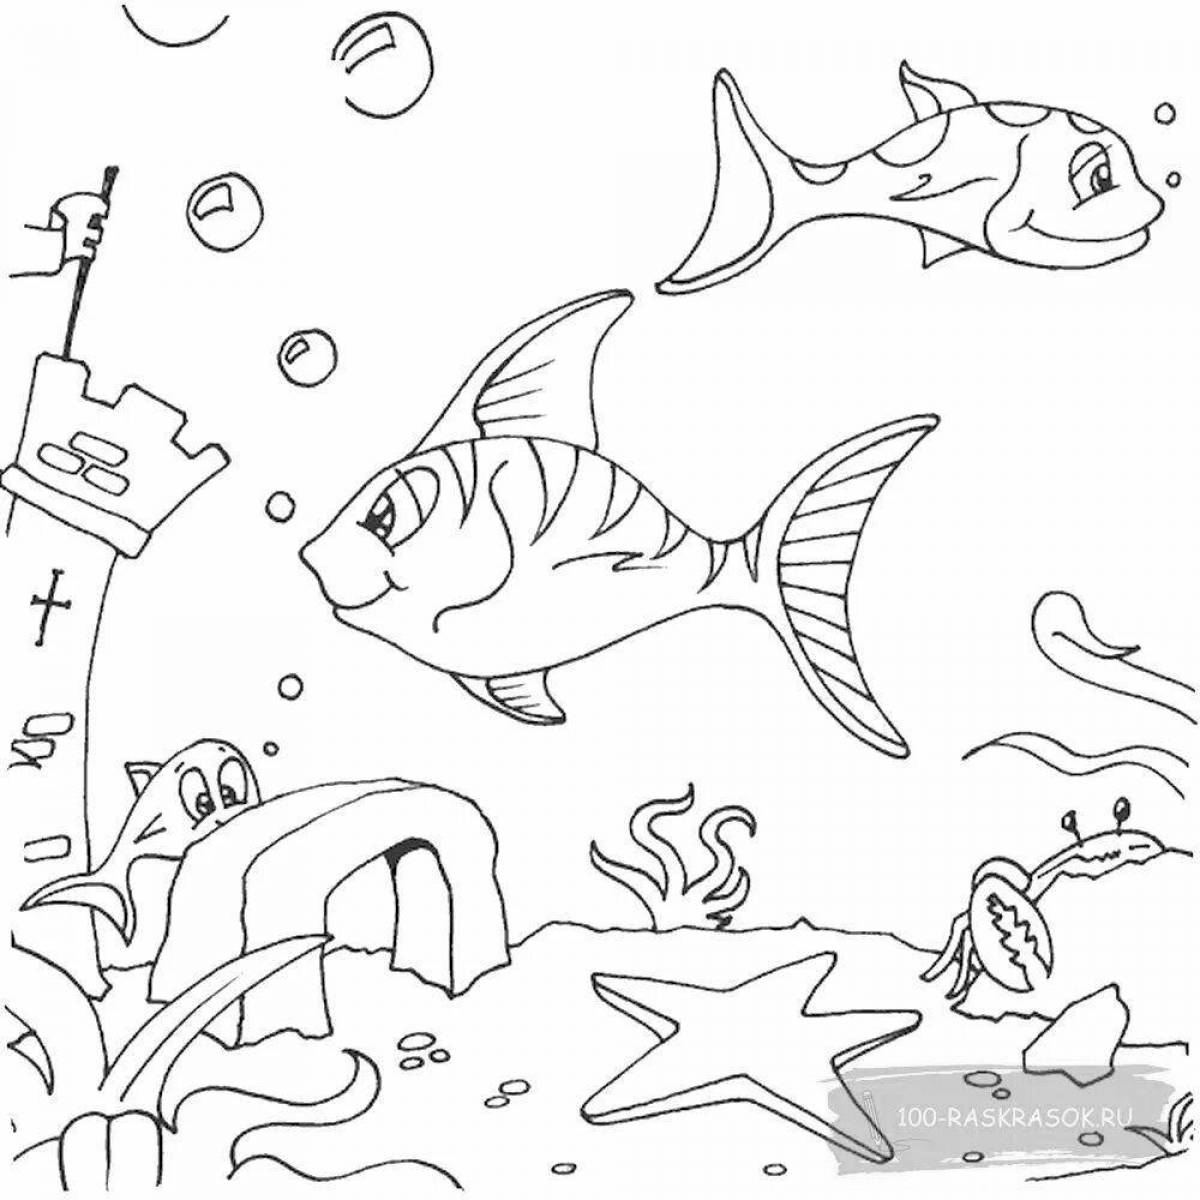 Coloring page inviting underwater world